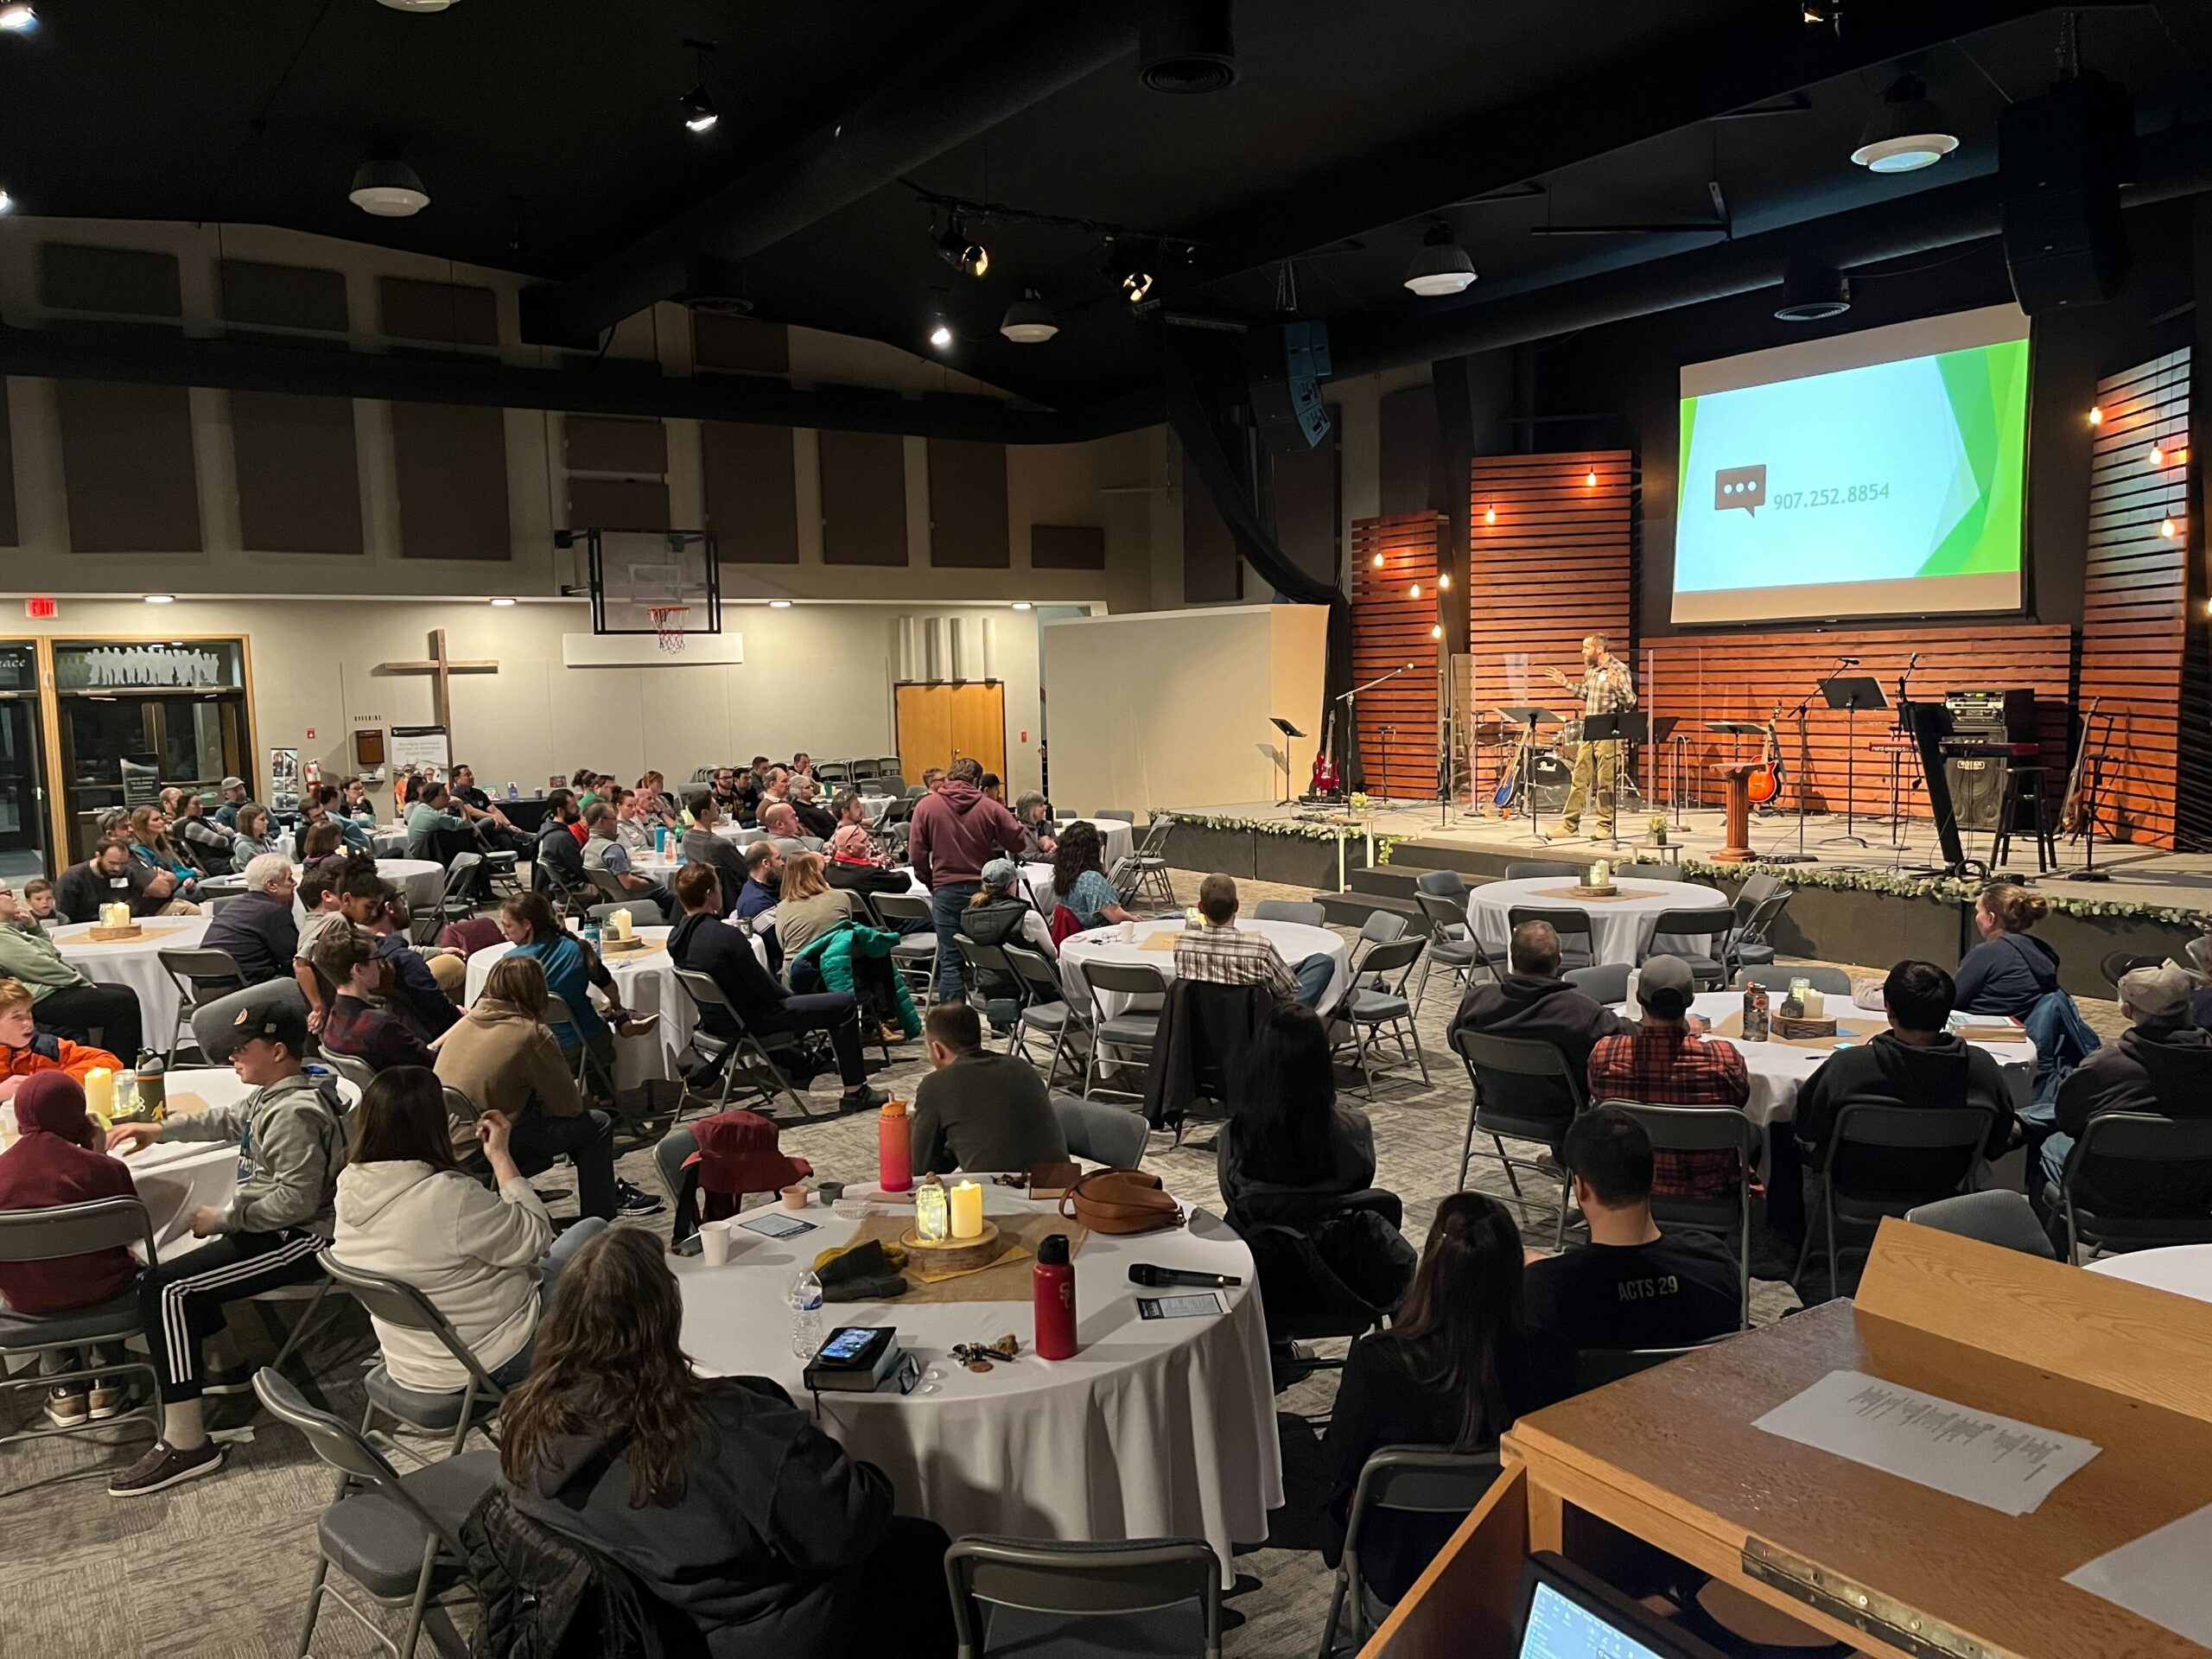 Churches Gather for Regional Conference in Alaska